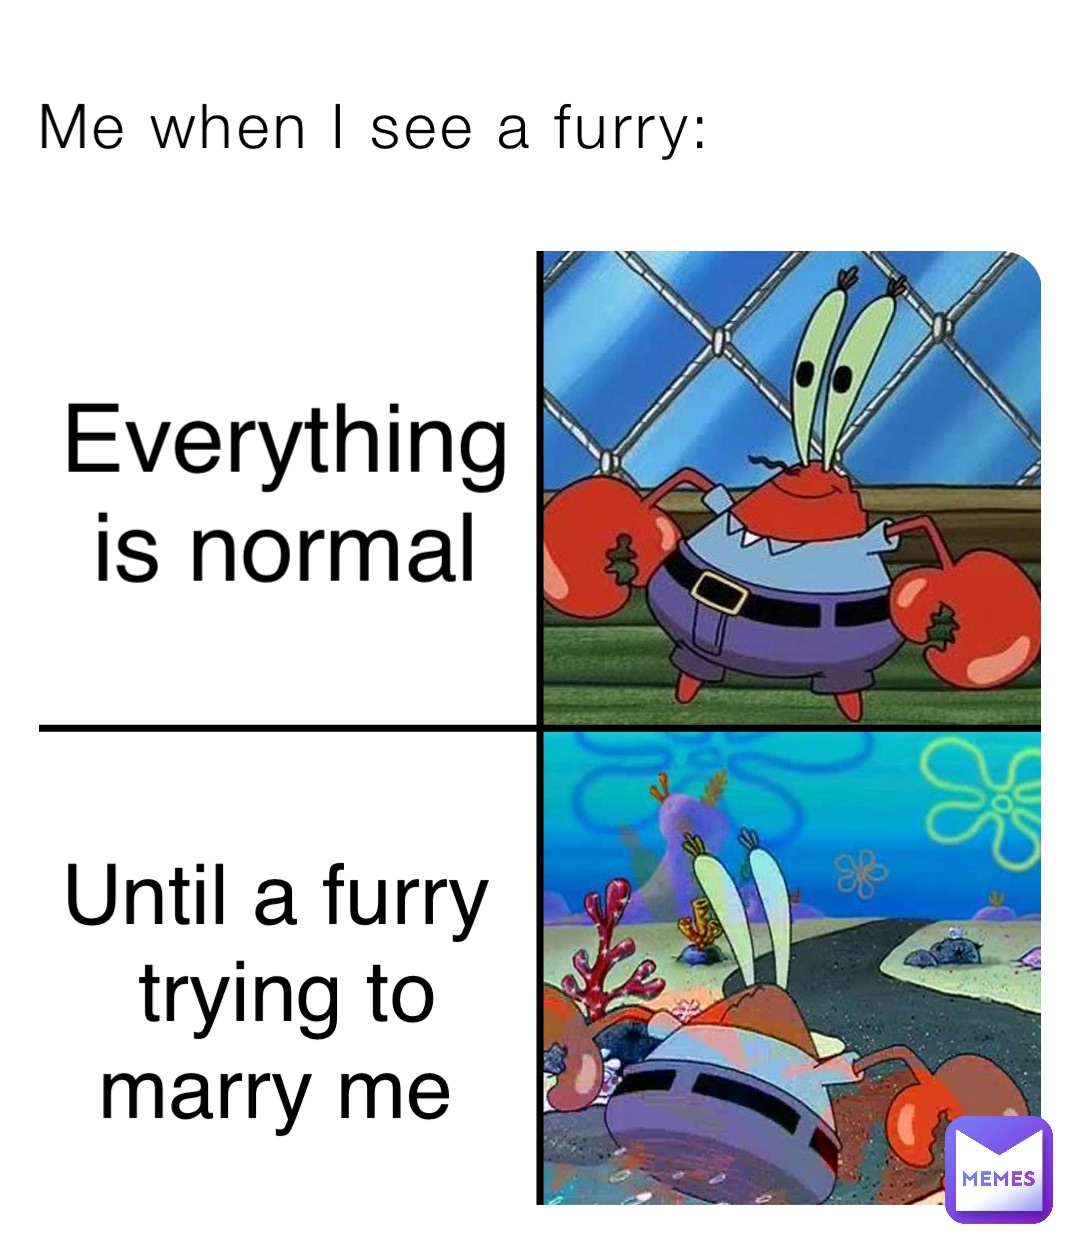 Me when I see a furry: Everything is normal Until a furry trying to marry me